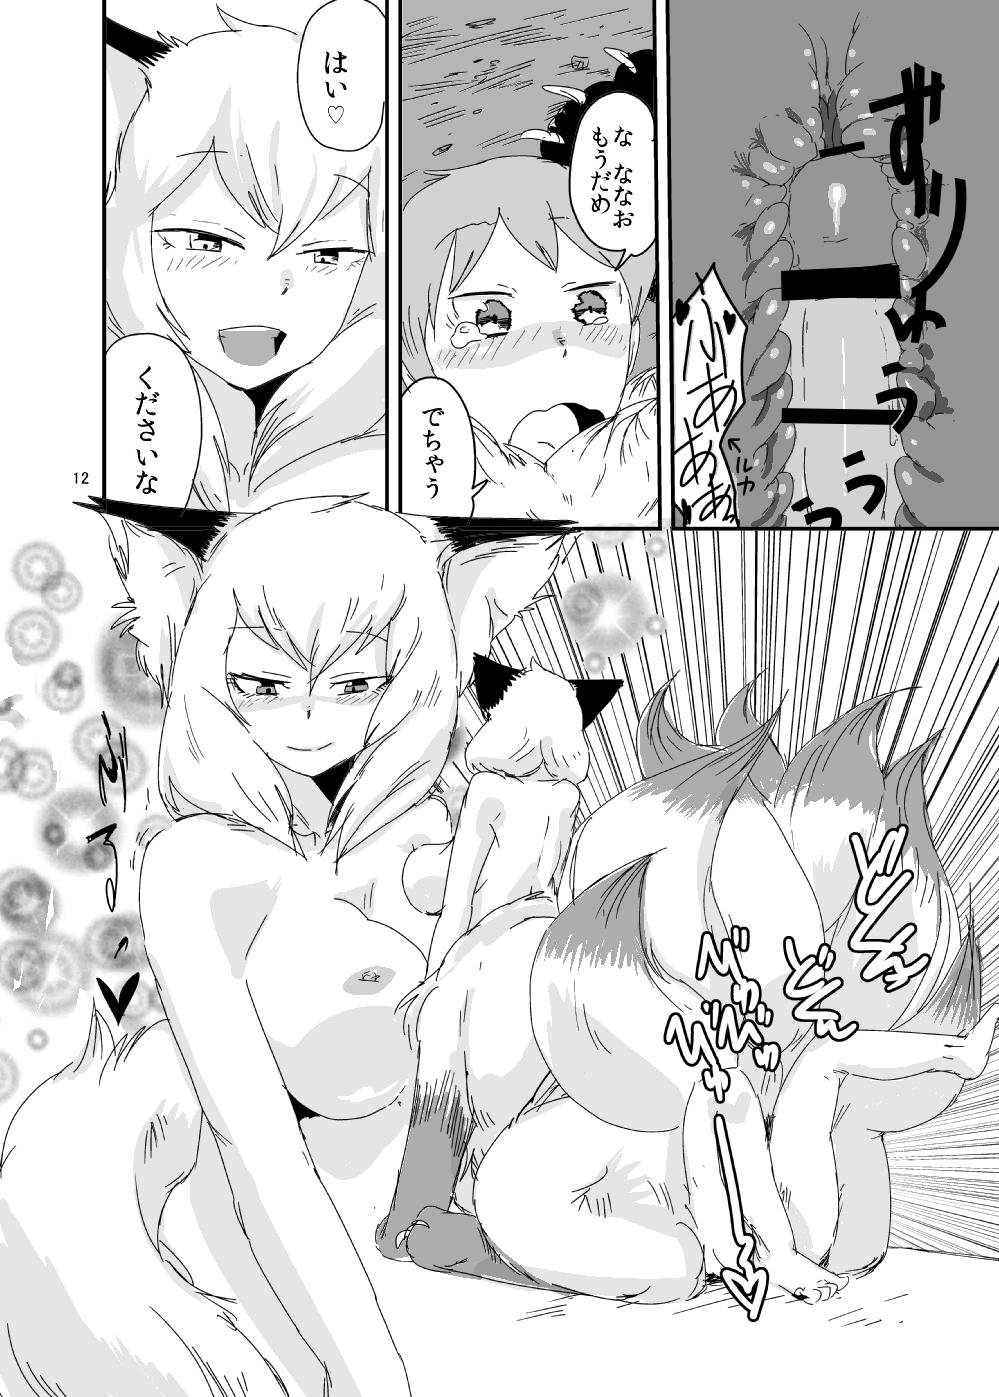 Tattooed Mon Musu Quest! Beyond The End - Monster girl quest Longhair - Page 11